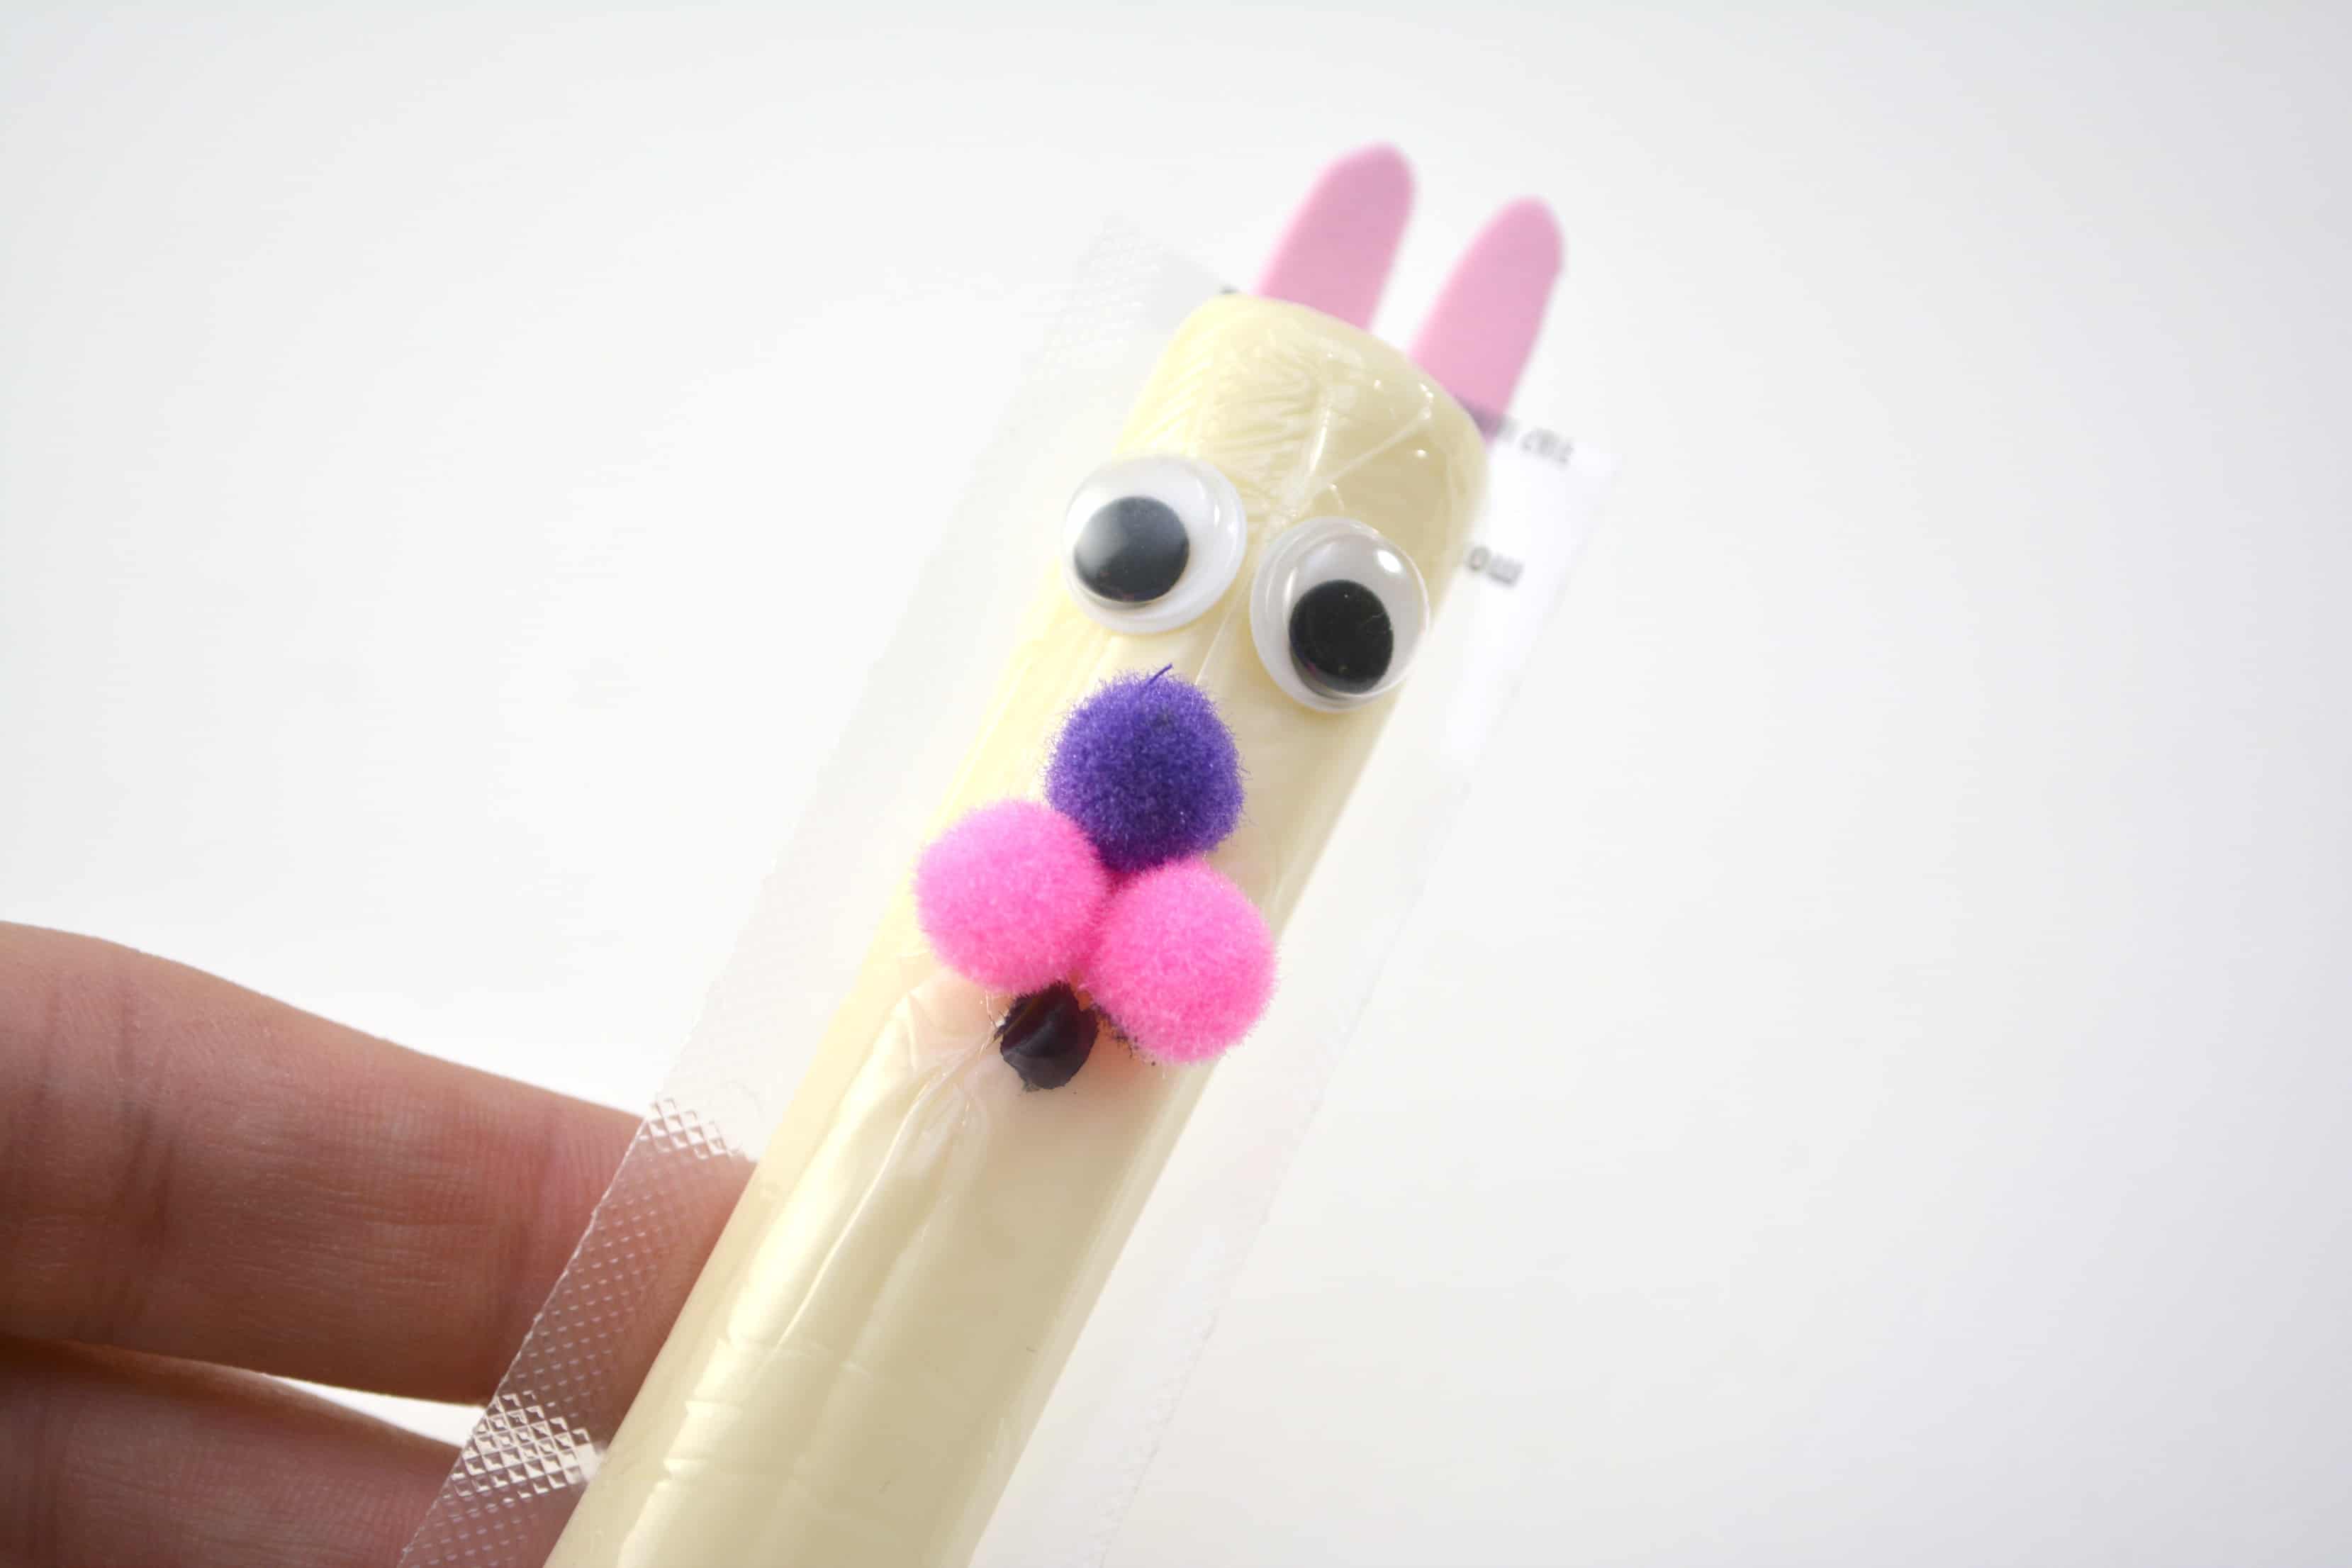 Easter is identical with bunnies and eggs. Today I would like to share Easter Bunny Cheese sticks for your little people's craft activities.